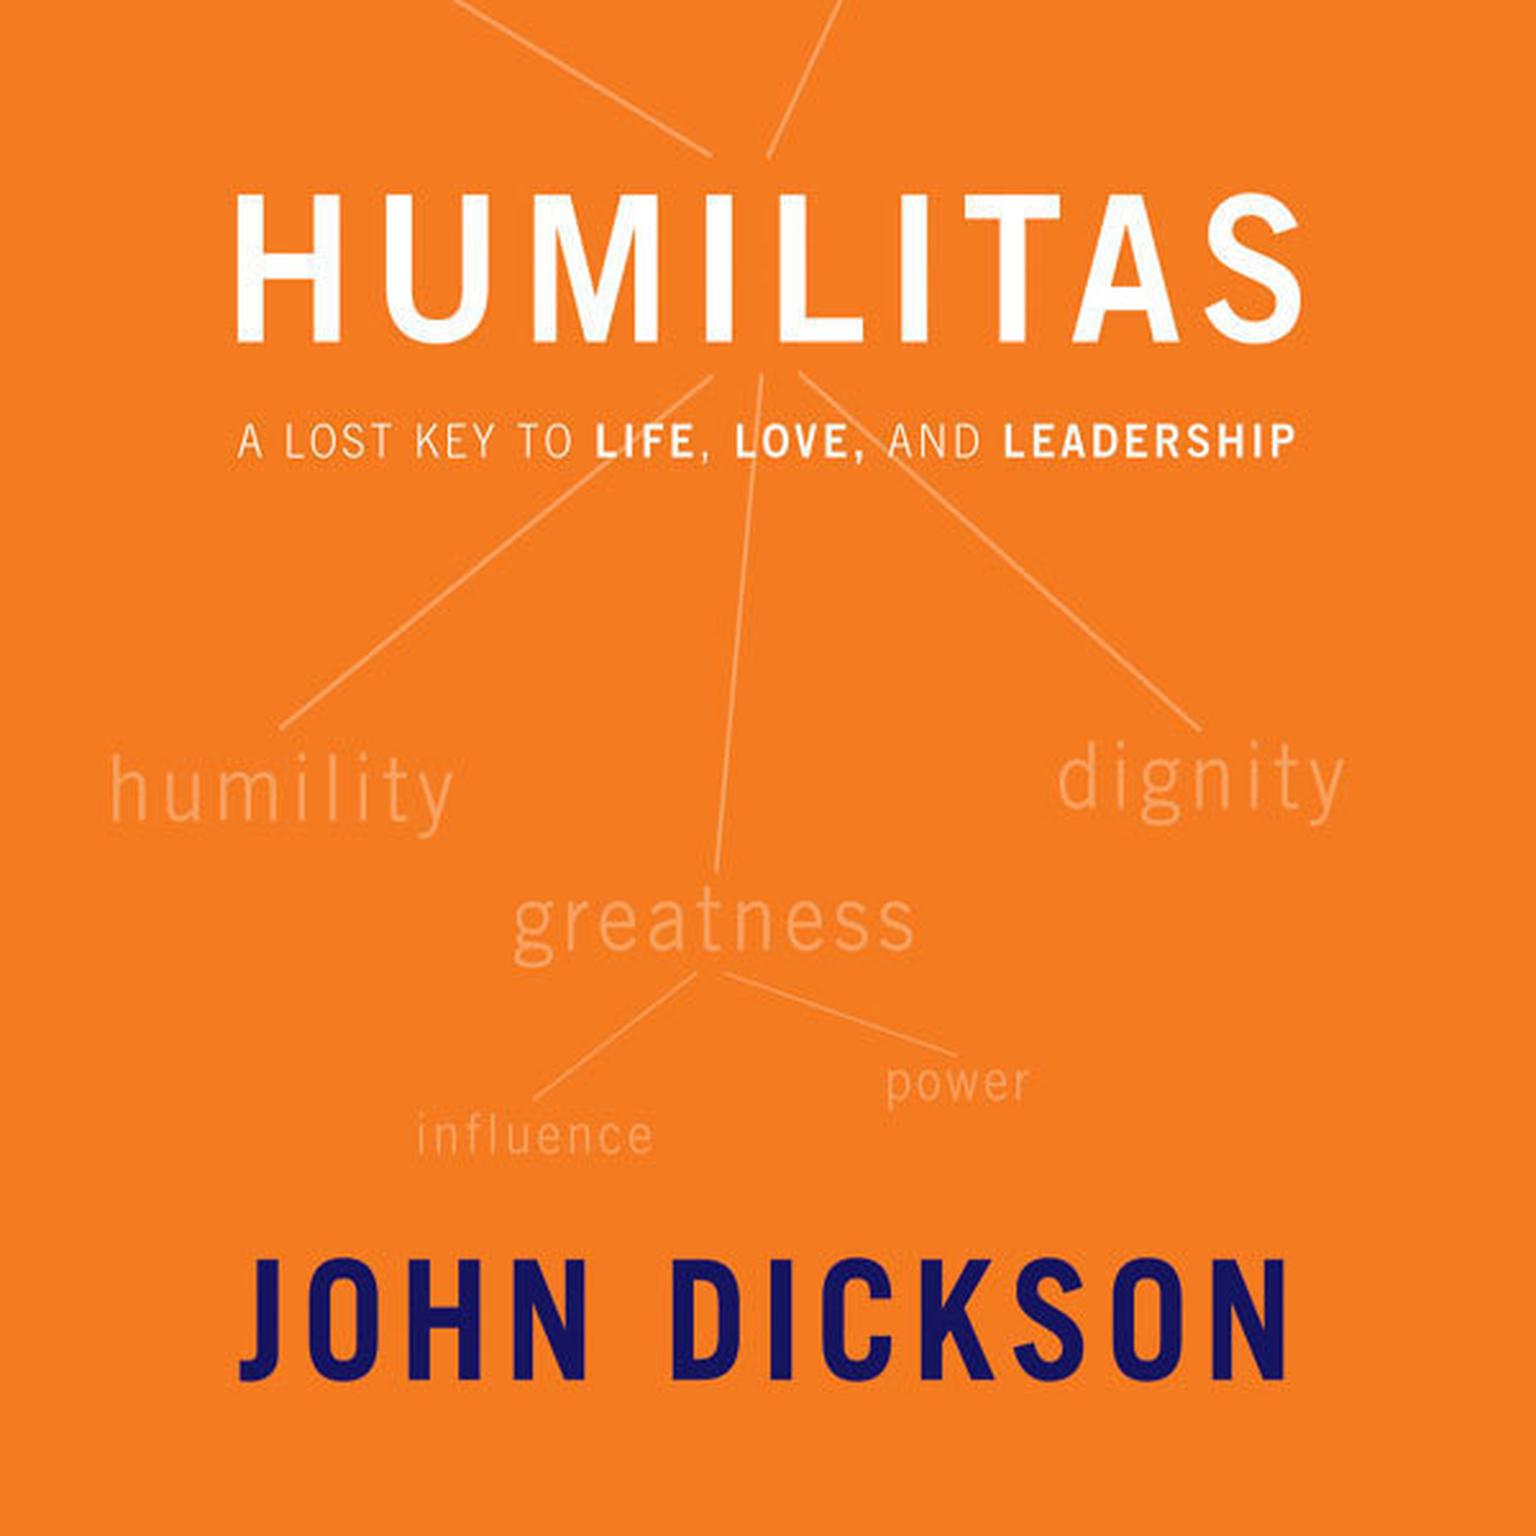 Humilitas: A Lost Key to Life, Love, and Leadership Audiobook, by John Dickson